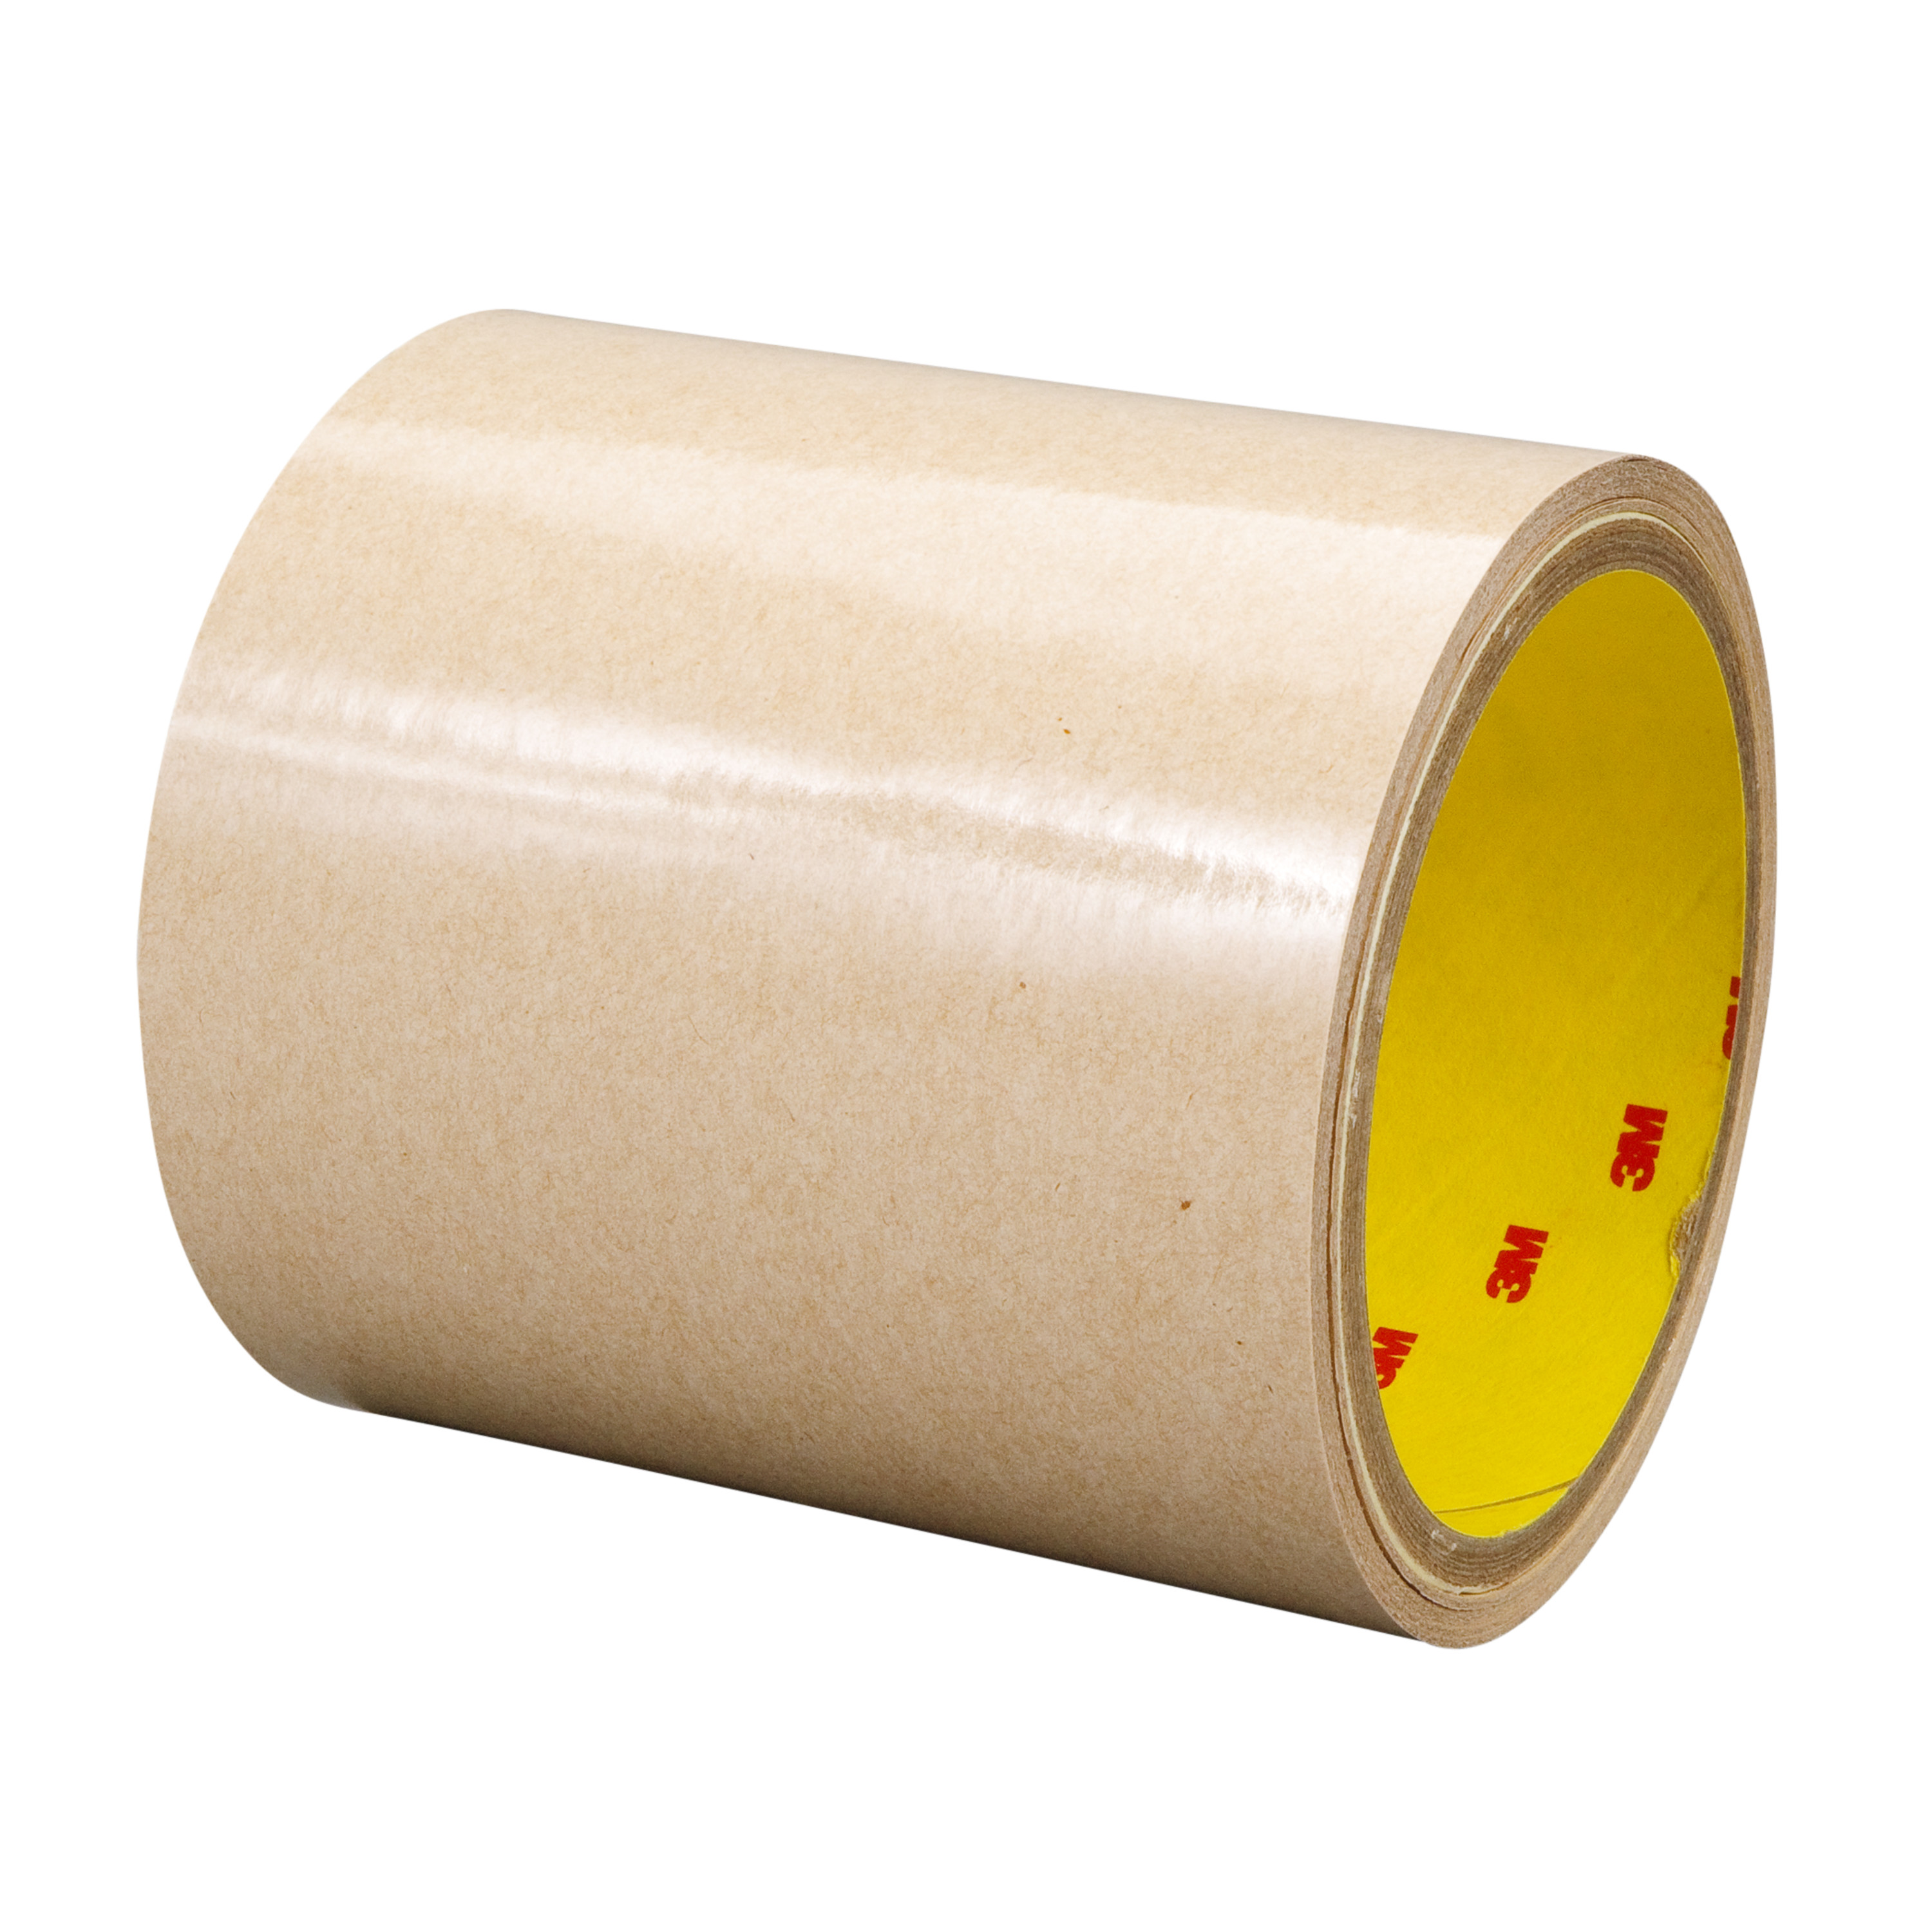 3M™ Adhesive Transfer Tape 9626, Clear, 2 mil, Roll, Config